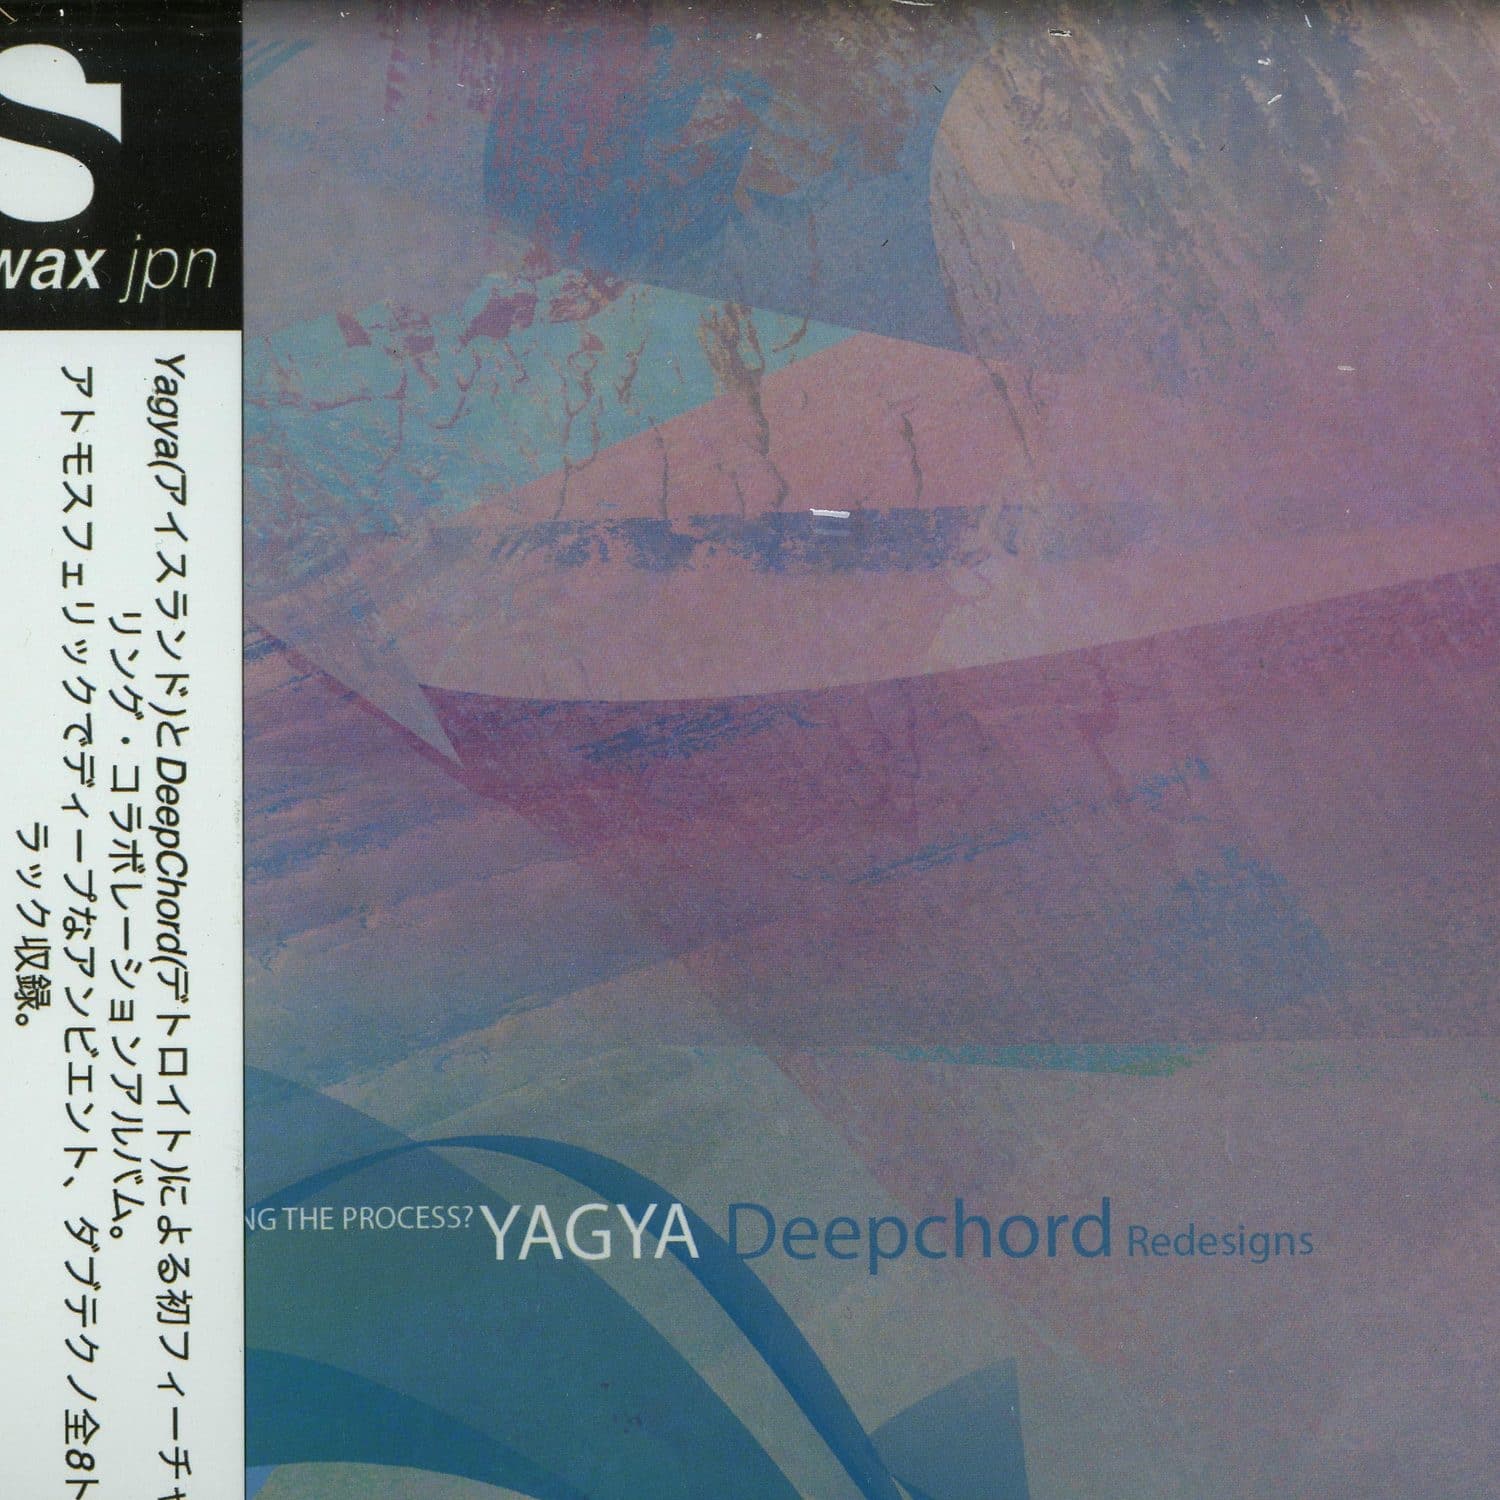 Yagya / DeepChord - WILL I DREAM DURING THE PROCESS / DEEPCHORD REDESIGNS 